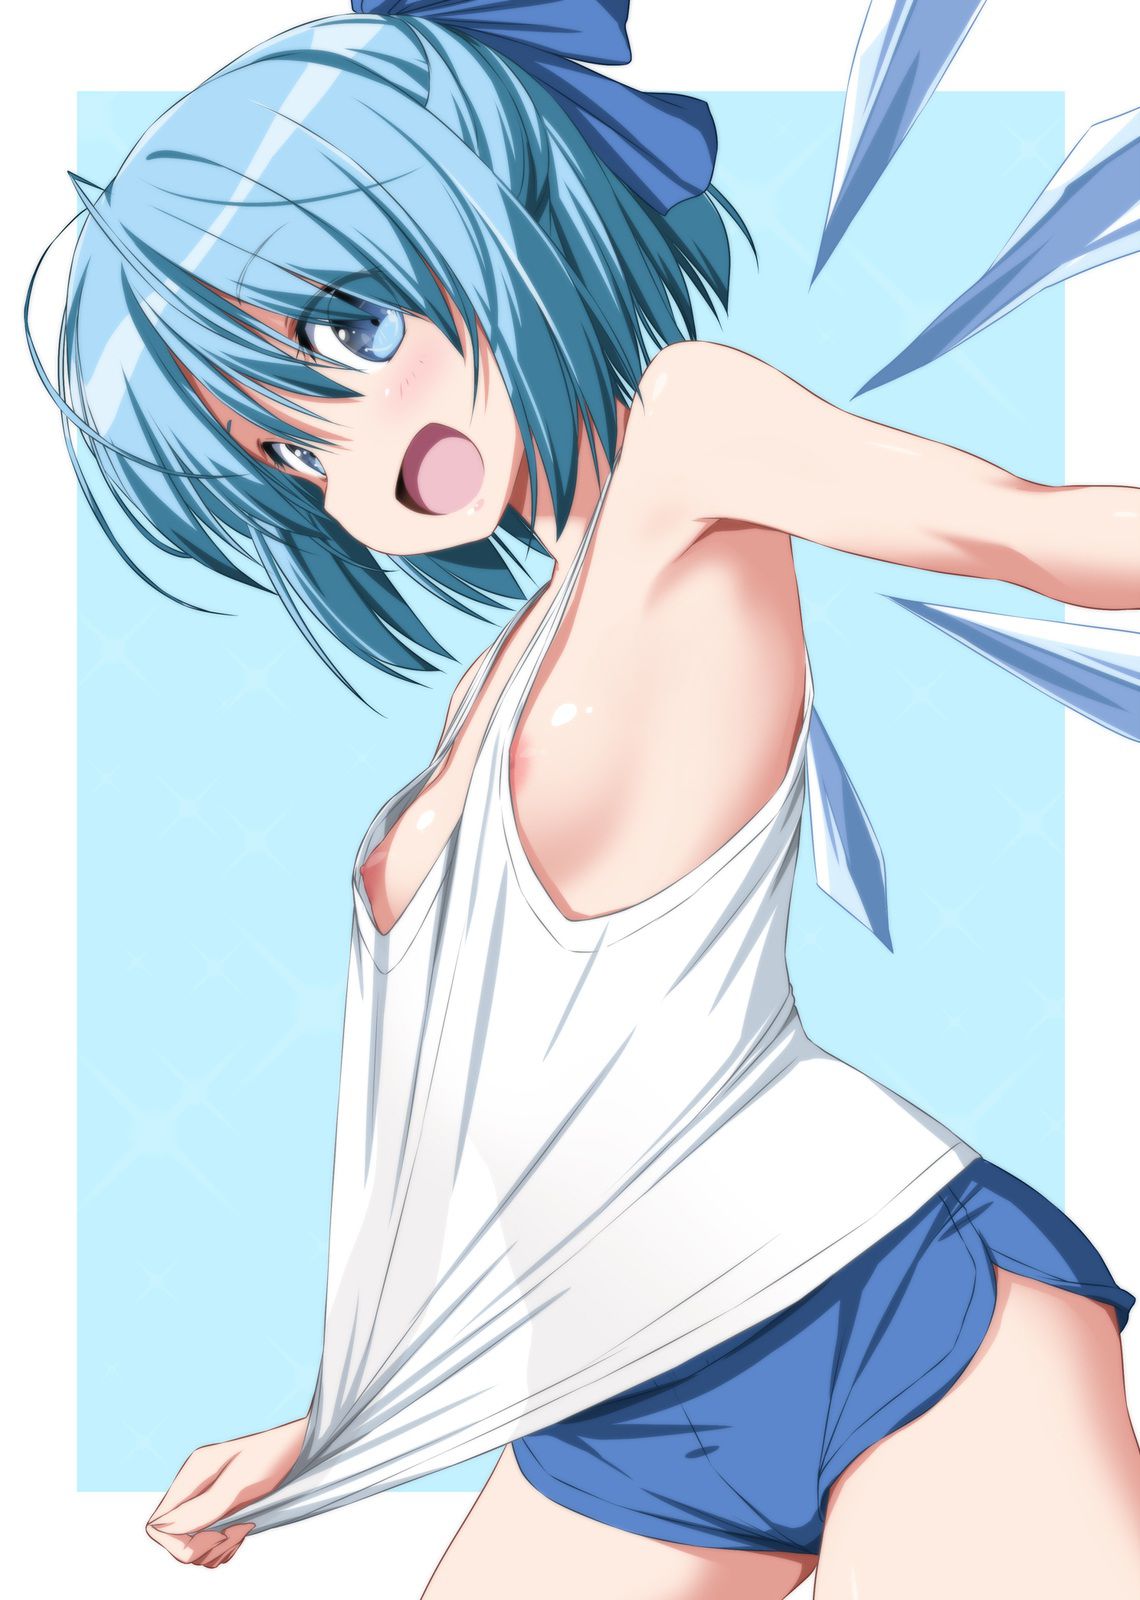 【Touhou Project】Erotic Images of Cirno Part 11 8